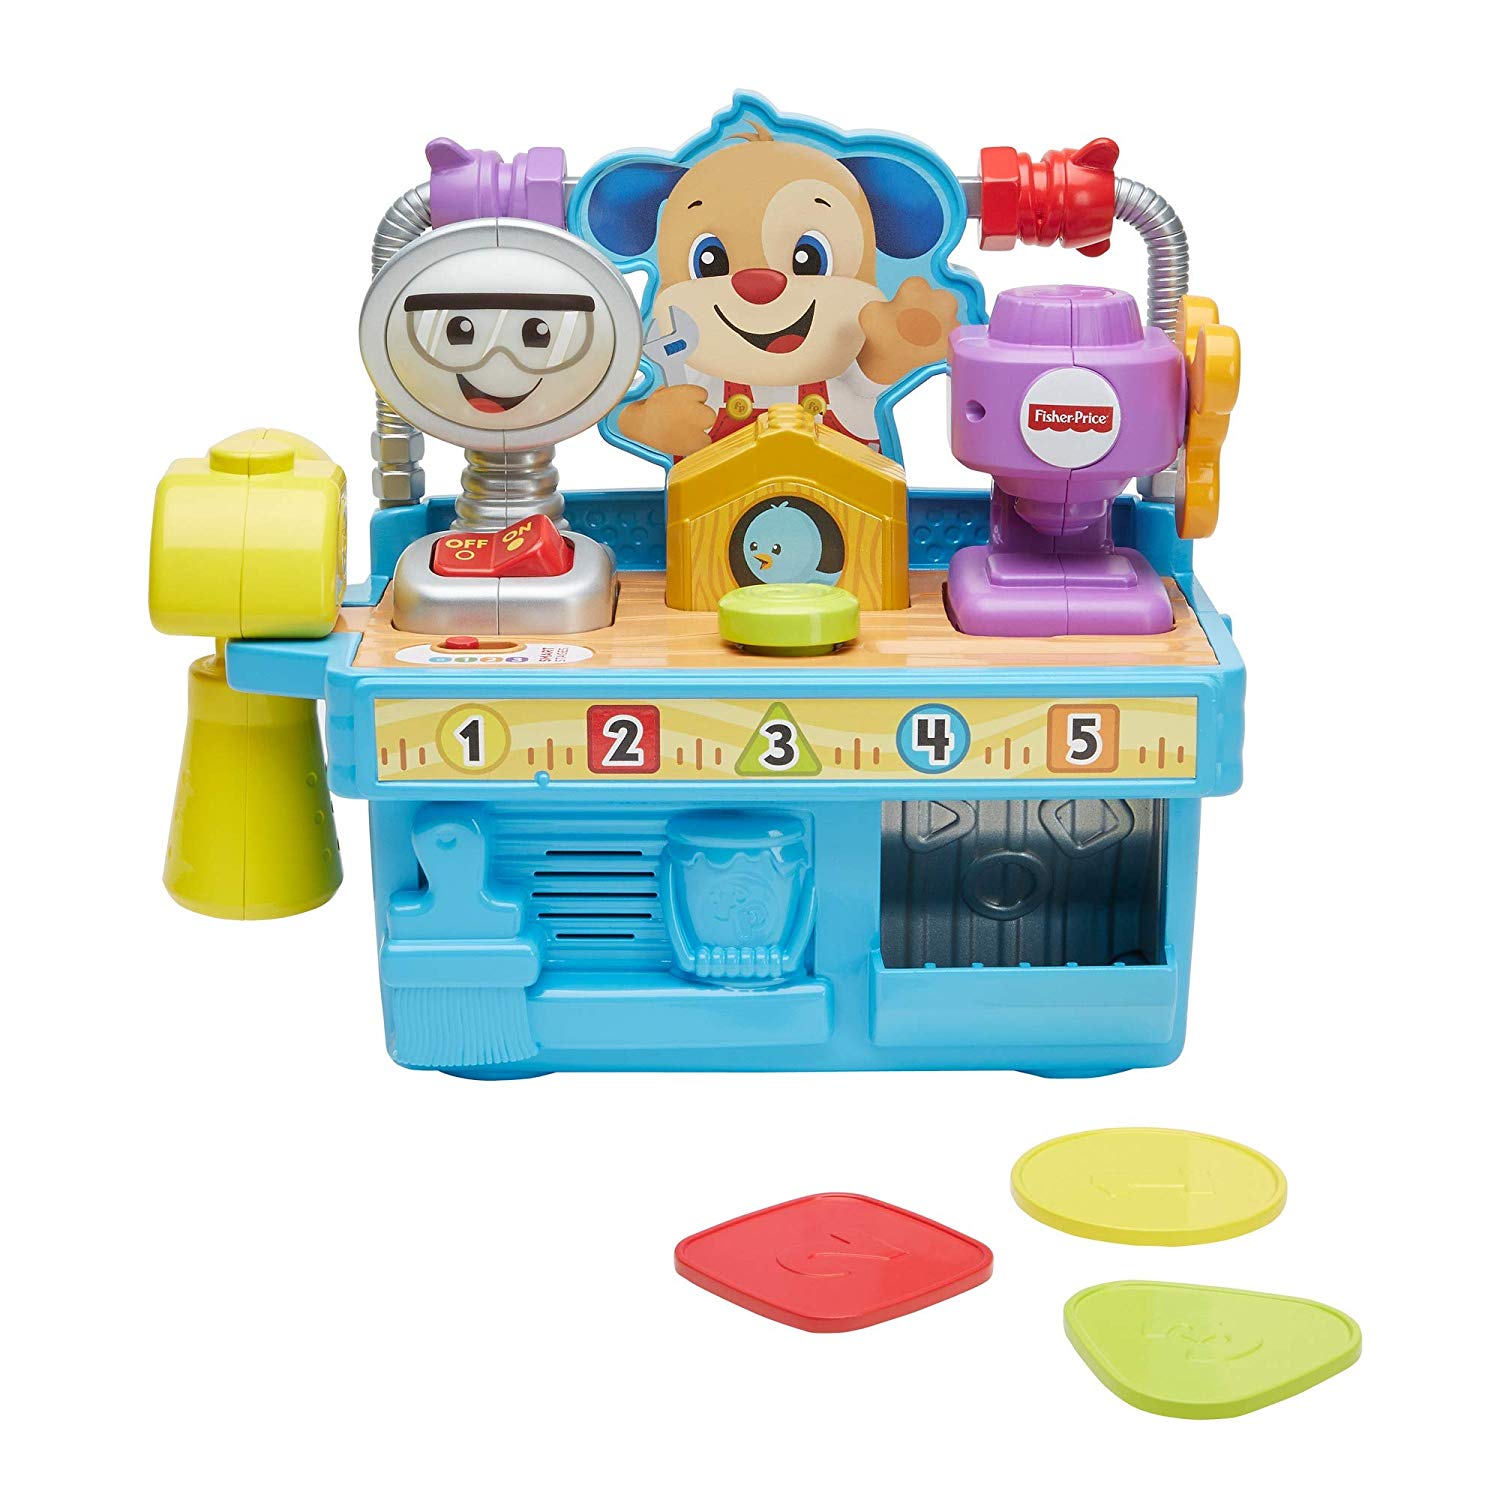 Fisher-Price Gfp11 Toy - Multicolour